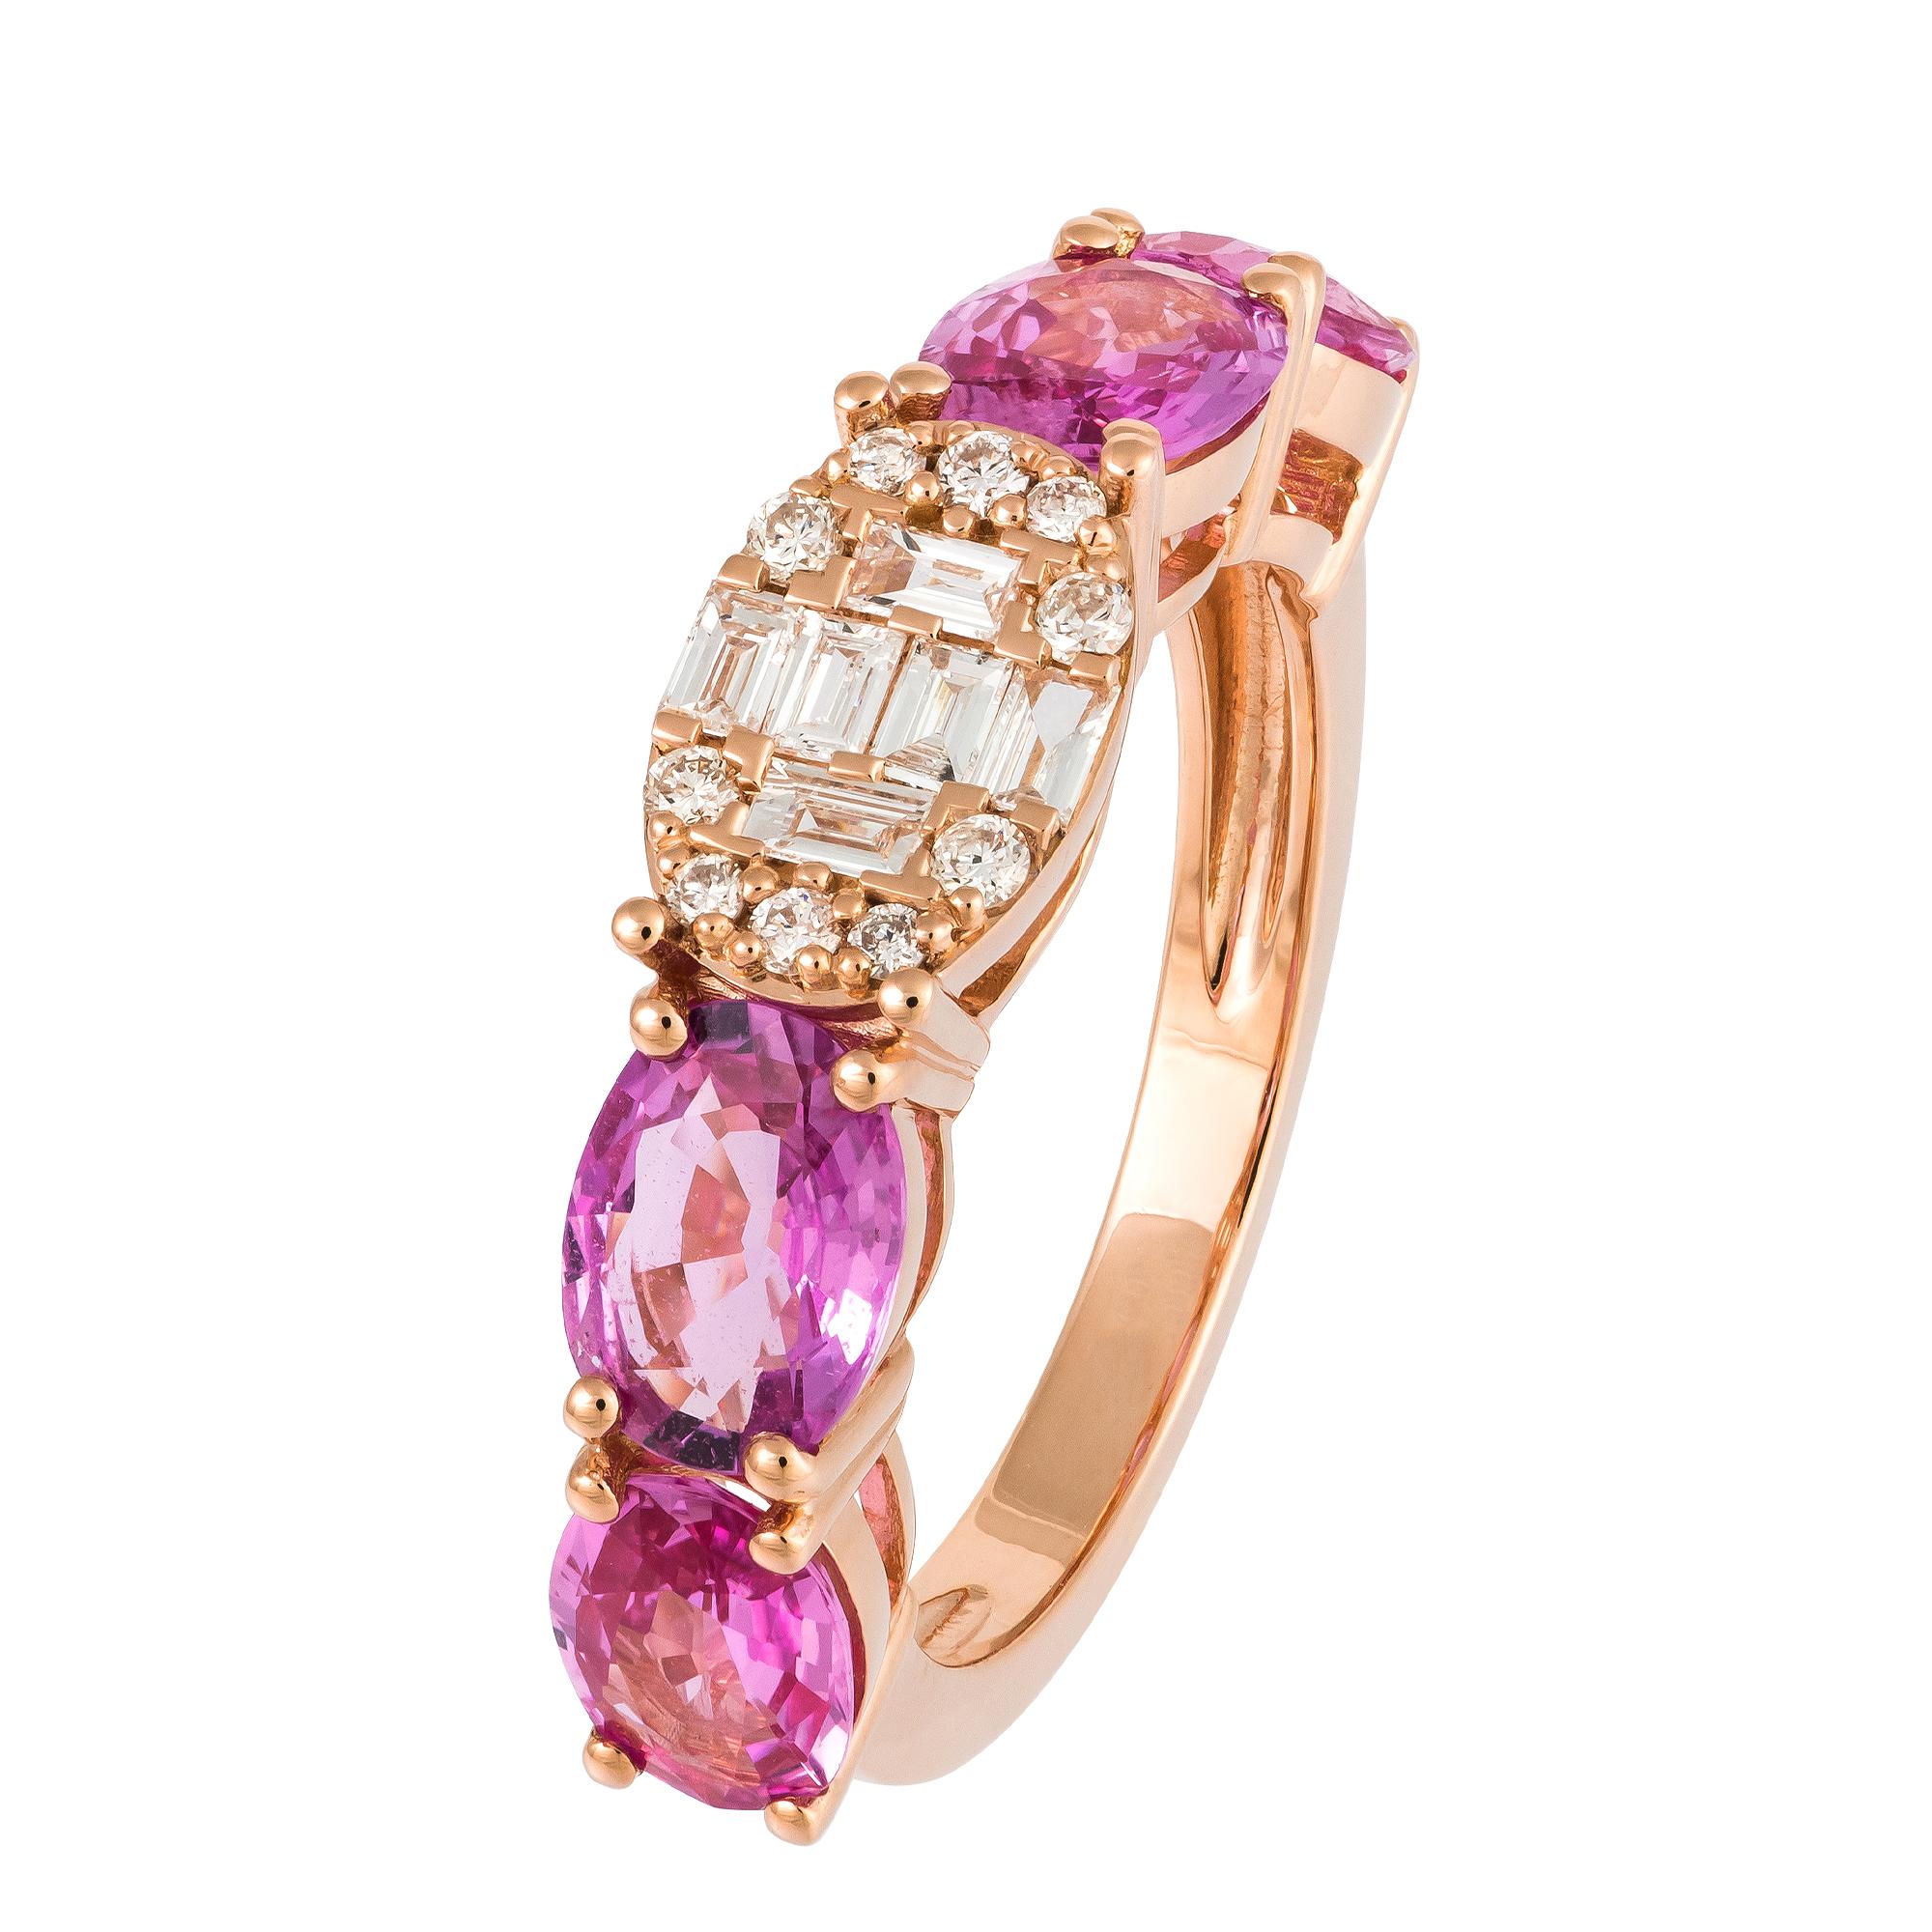 For Sale:  Breathtaking Pink 18K Gold Pink Sapphire Diamond Ring For Her 4